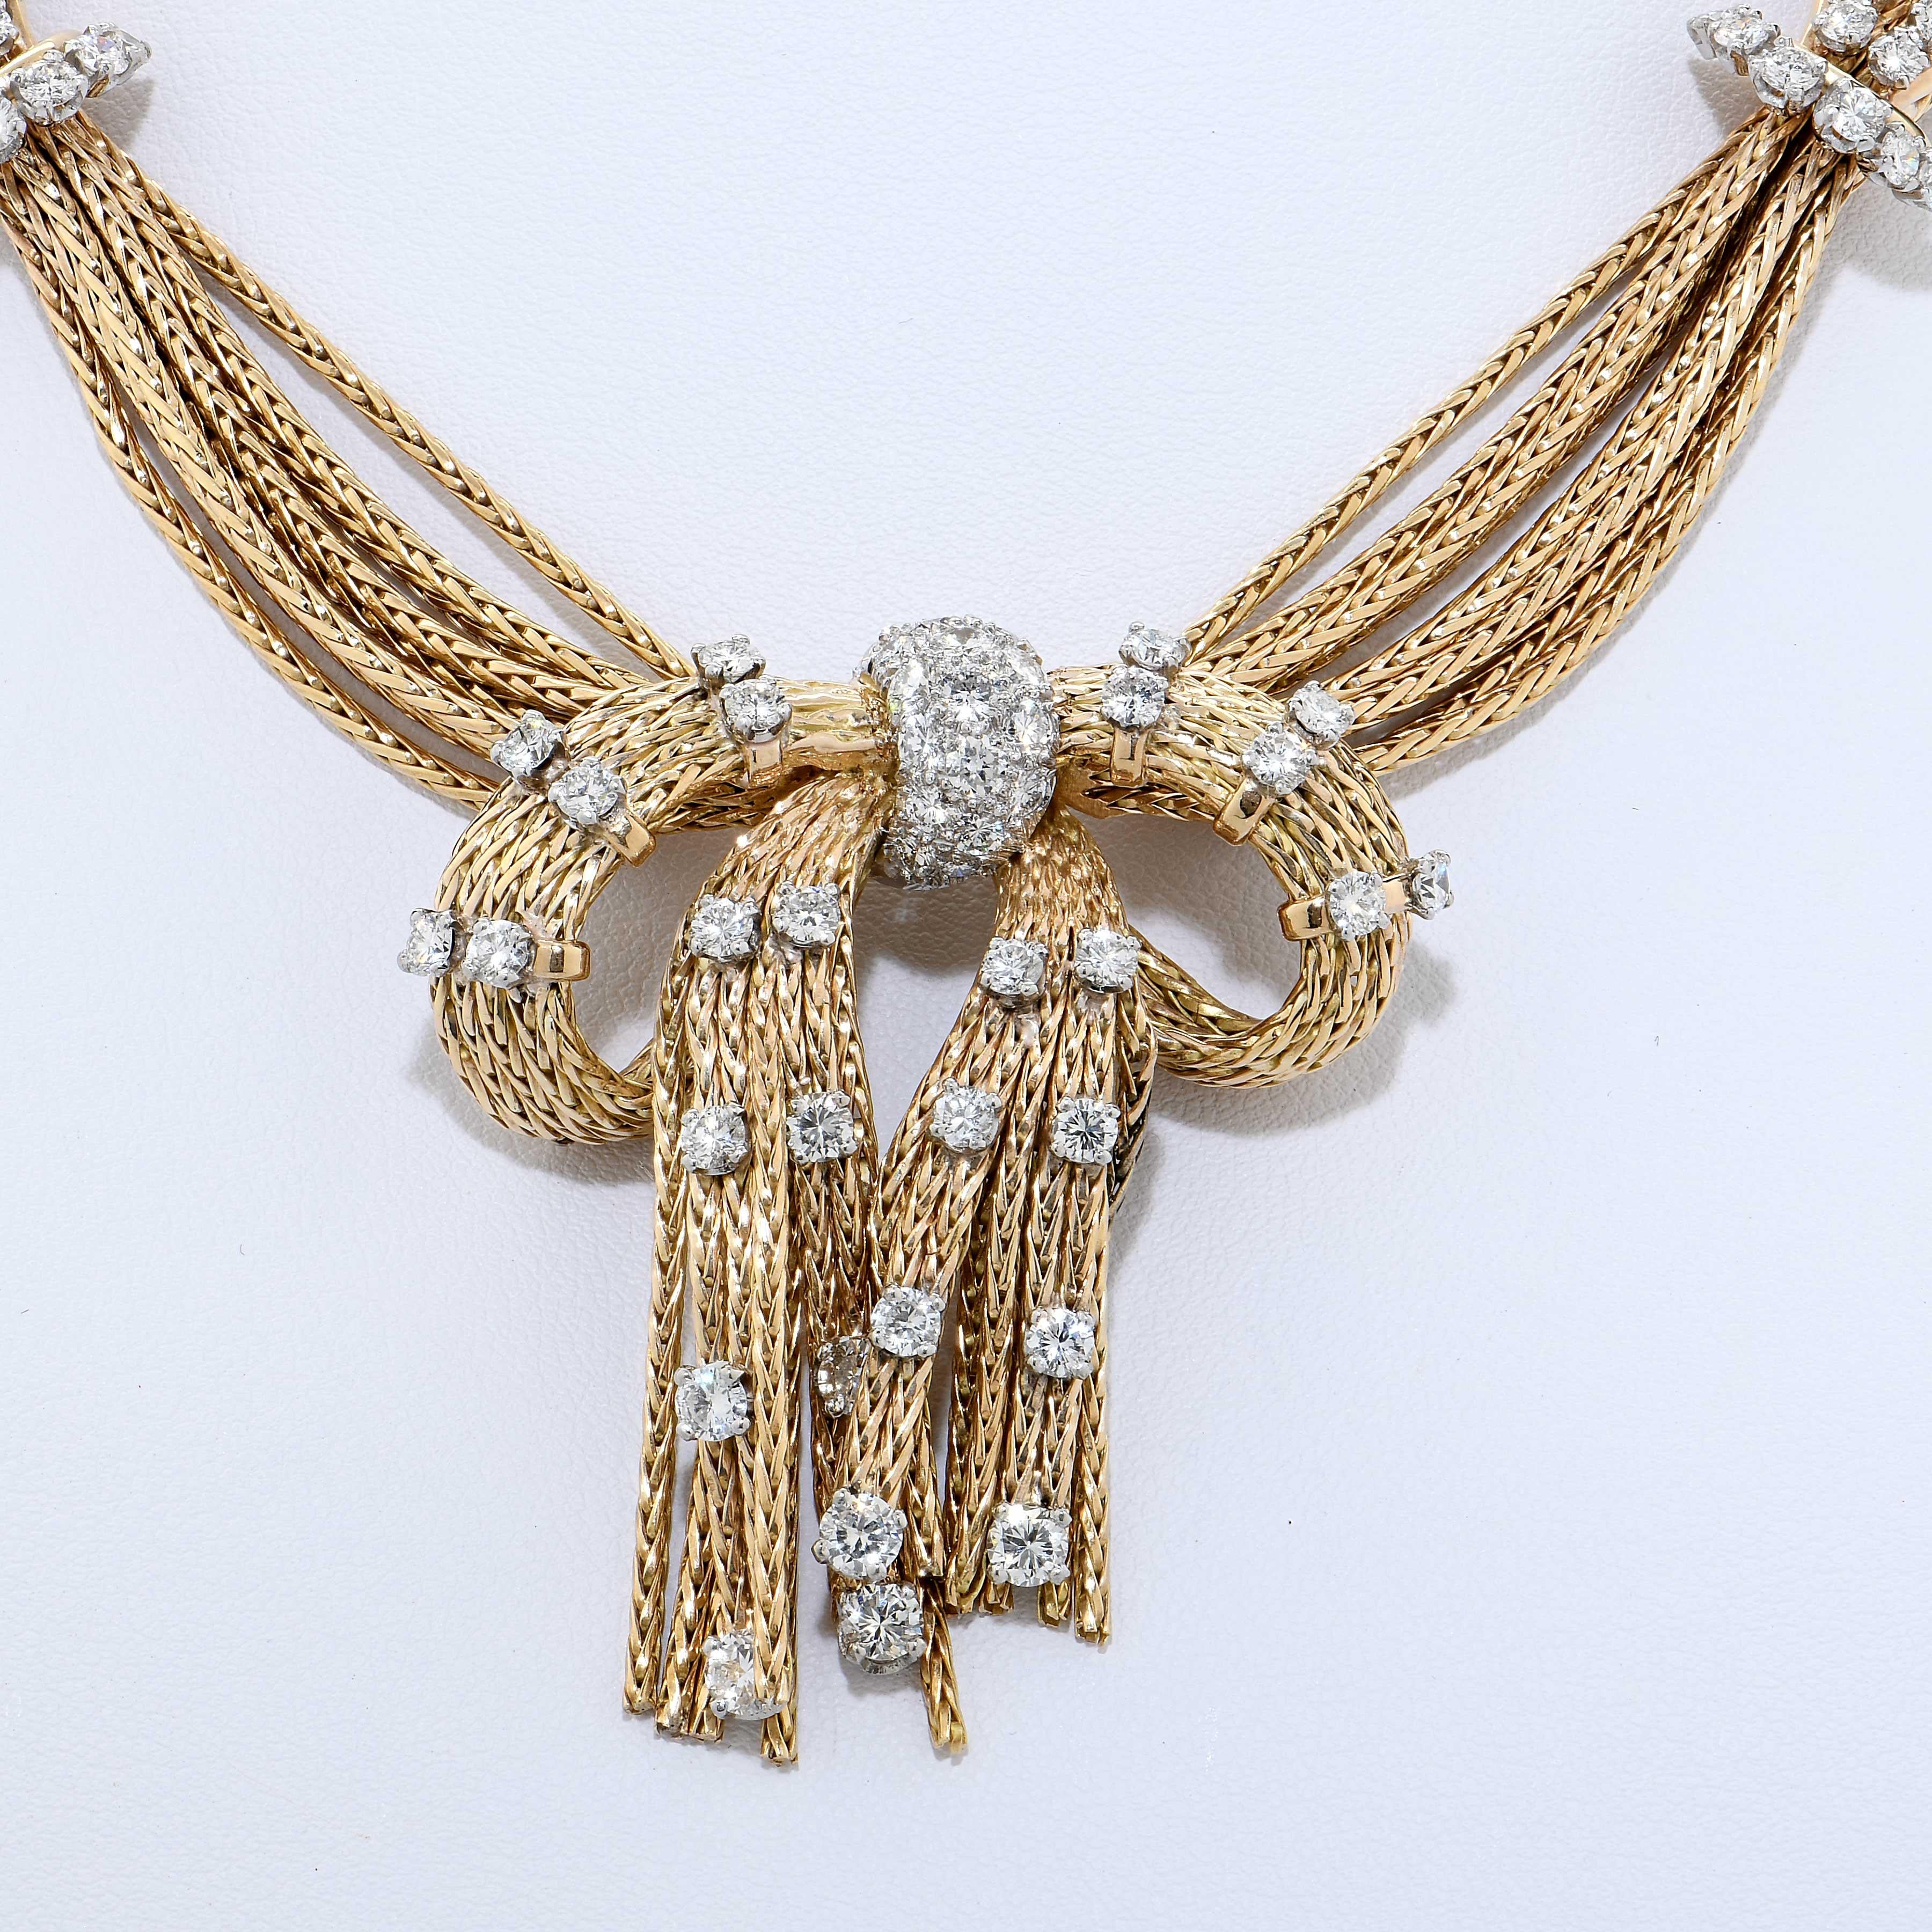 Raymond Yard Strand Diamond Necklace Circa 1950 in 18 Karat Yellow Gold featuring 140 round brilliant cut diamonds G color VS clarity with a total estimated weight of 12 carats. 
This gorgeous necklace flows beautifully and is worthy of a great